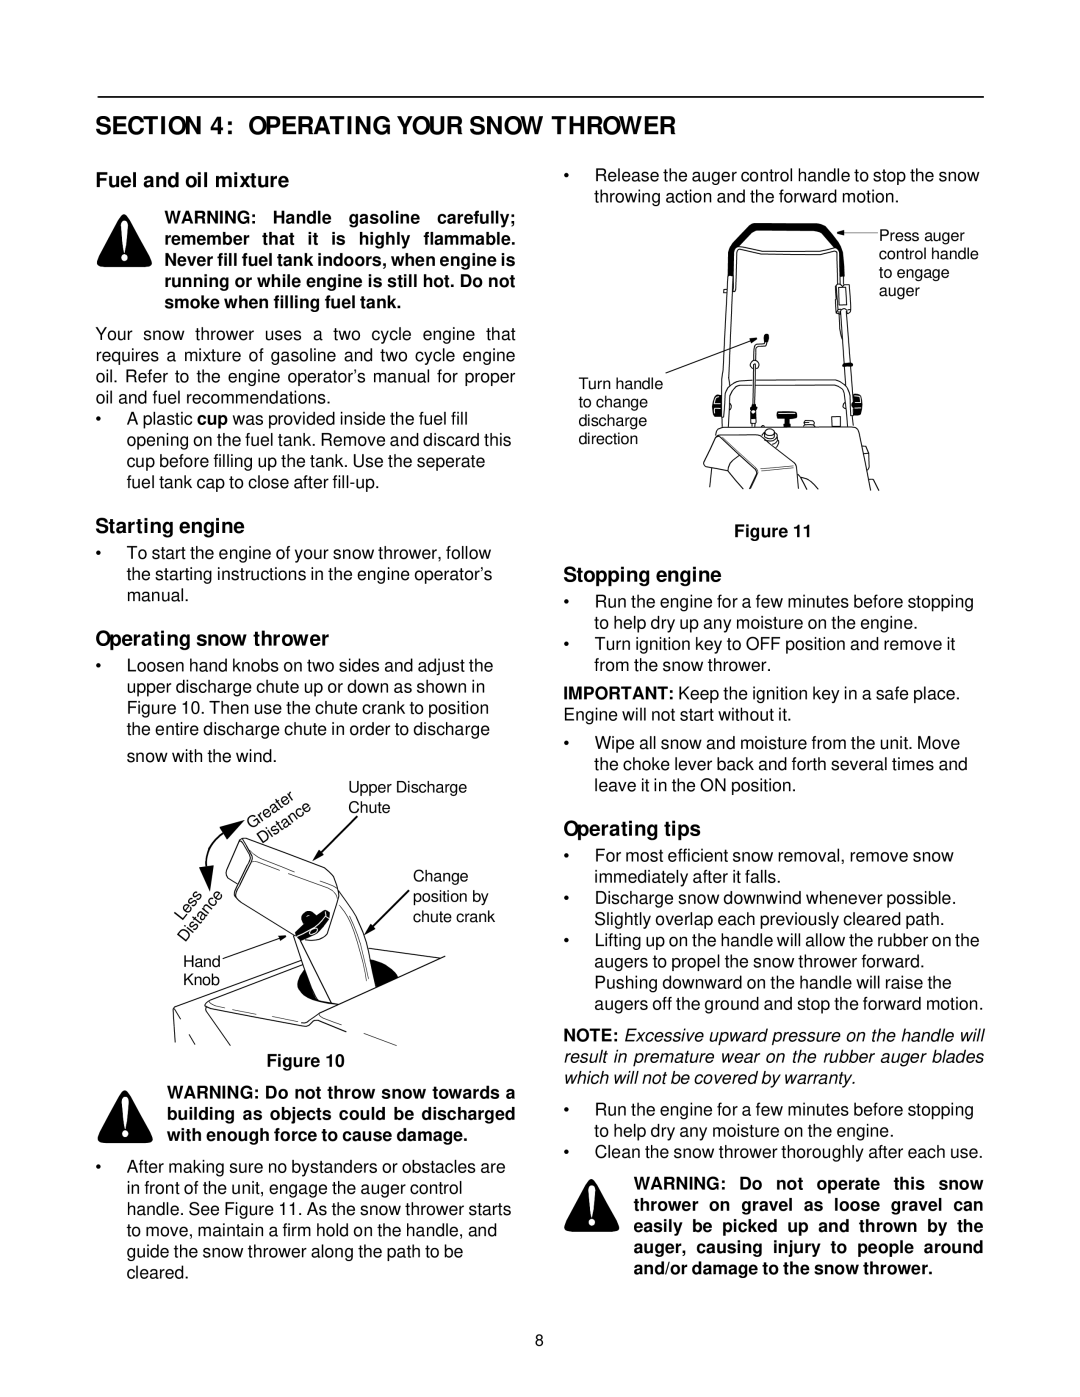 White Outdoor SB 45 manual Operating Your Snow Thrower 